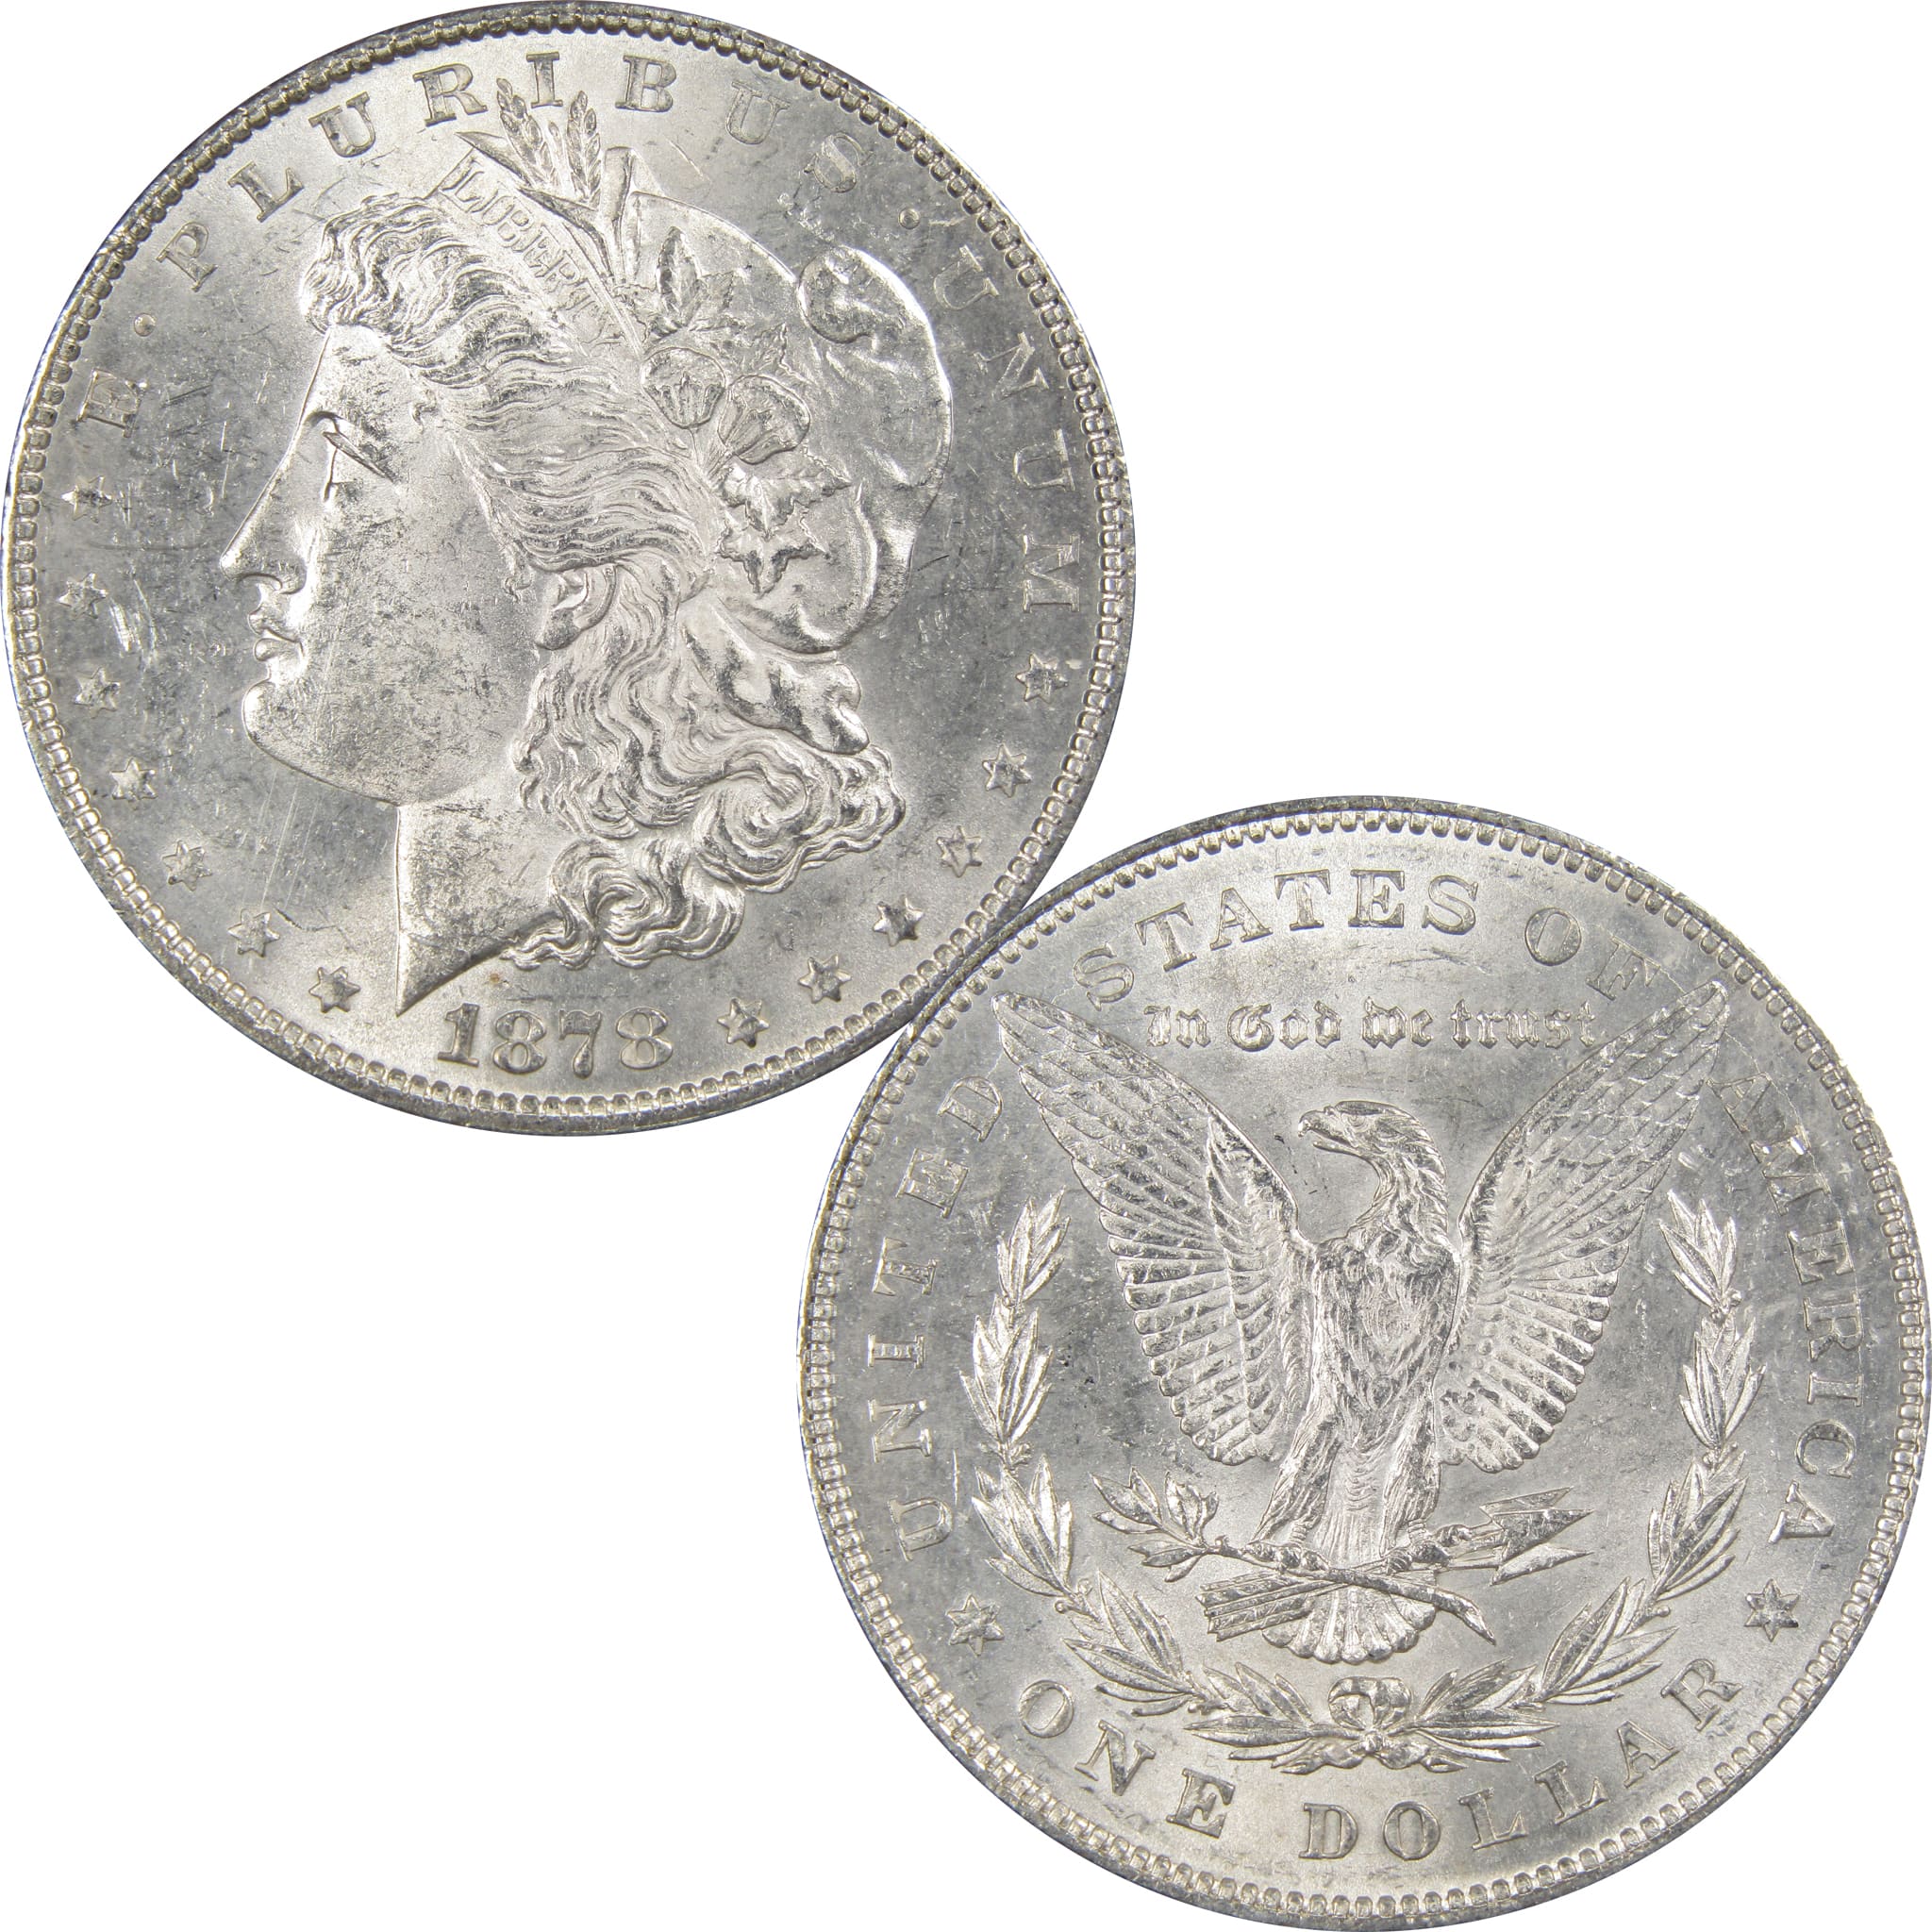 1878 7TF Rev 78 Morgan Dollar Choice About Uncirculated SKU:IPC7477 - Morgan coin - Morgan silver dollar - Morgan silver dollar for sale - Profile Coins &amp; Collectibles